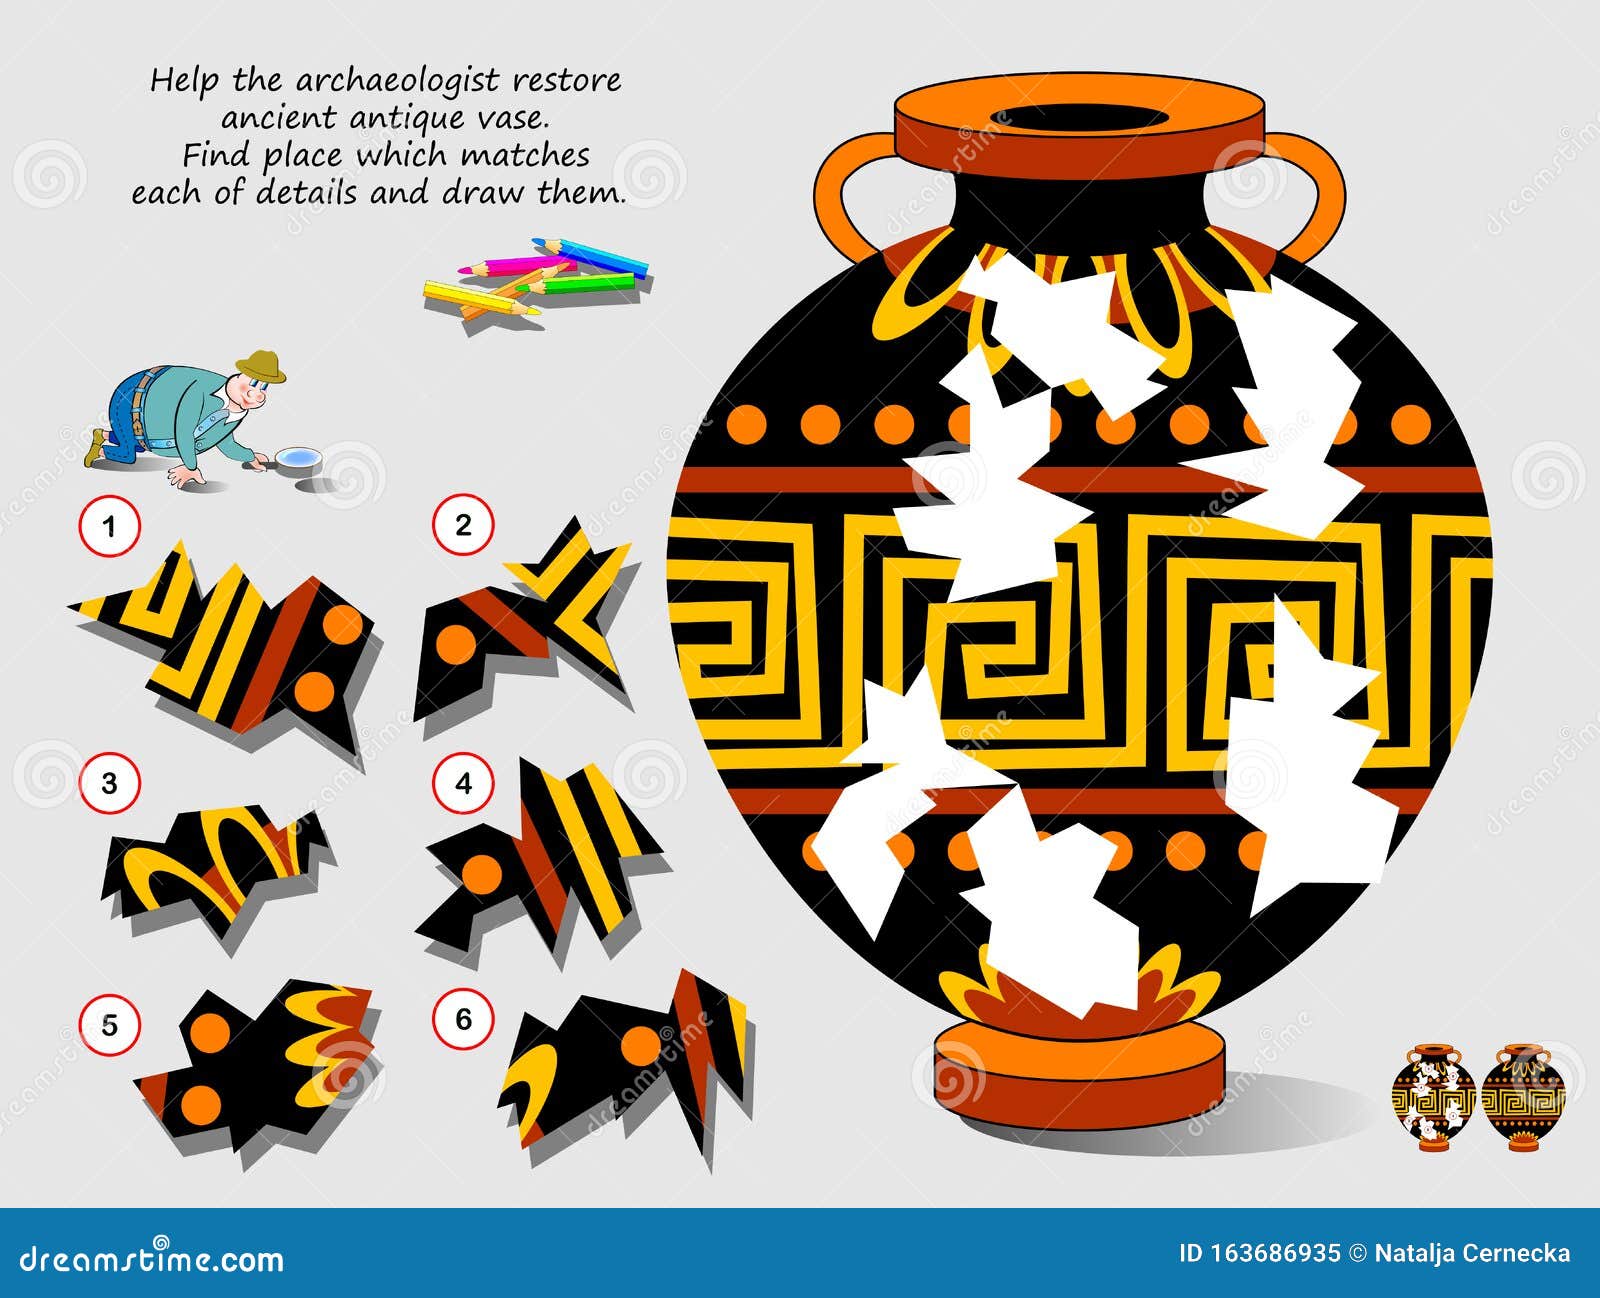 logic puzzle game for children. help archaeologist restore ancient antique vase. find place which matches each of details.